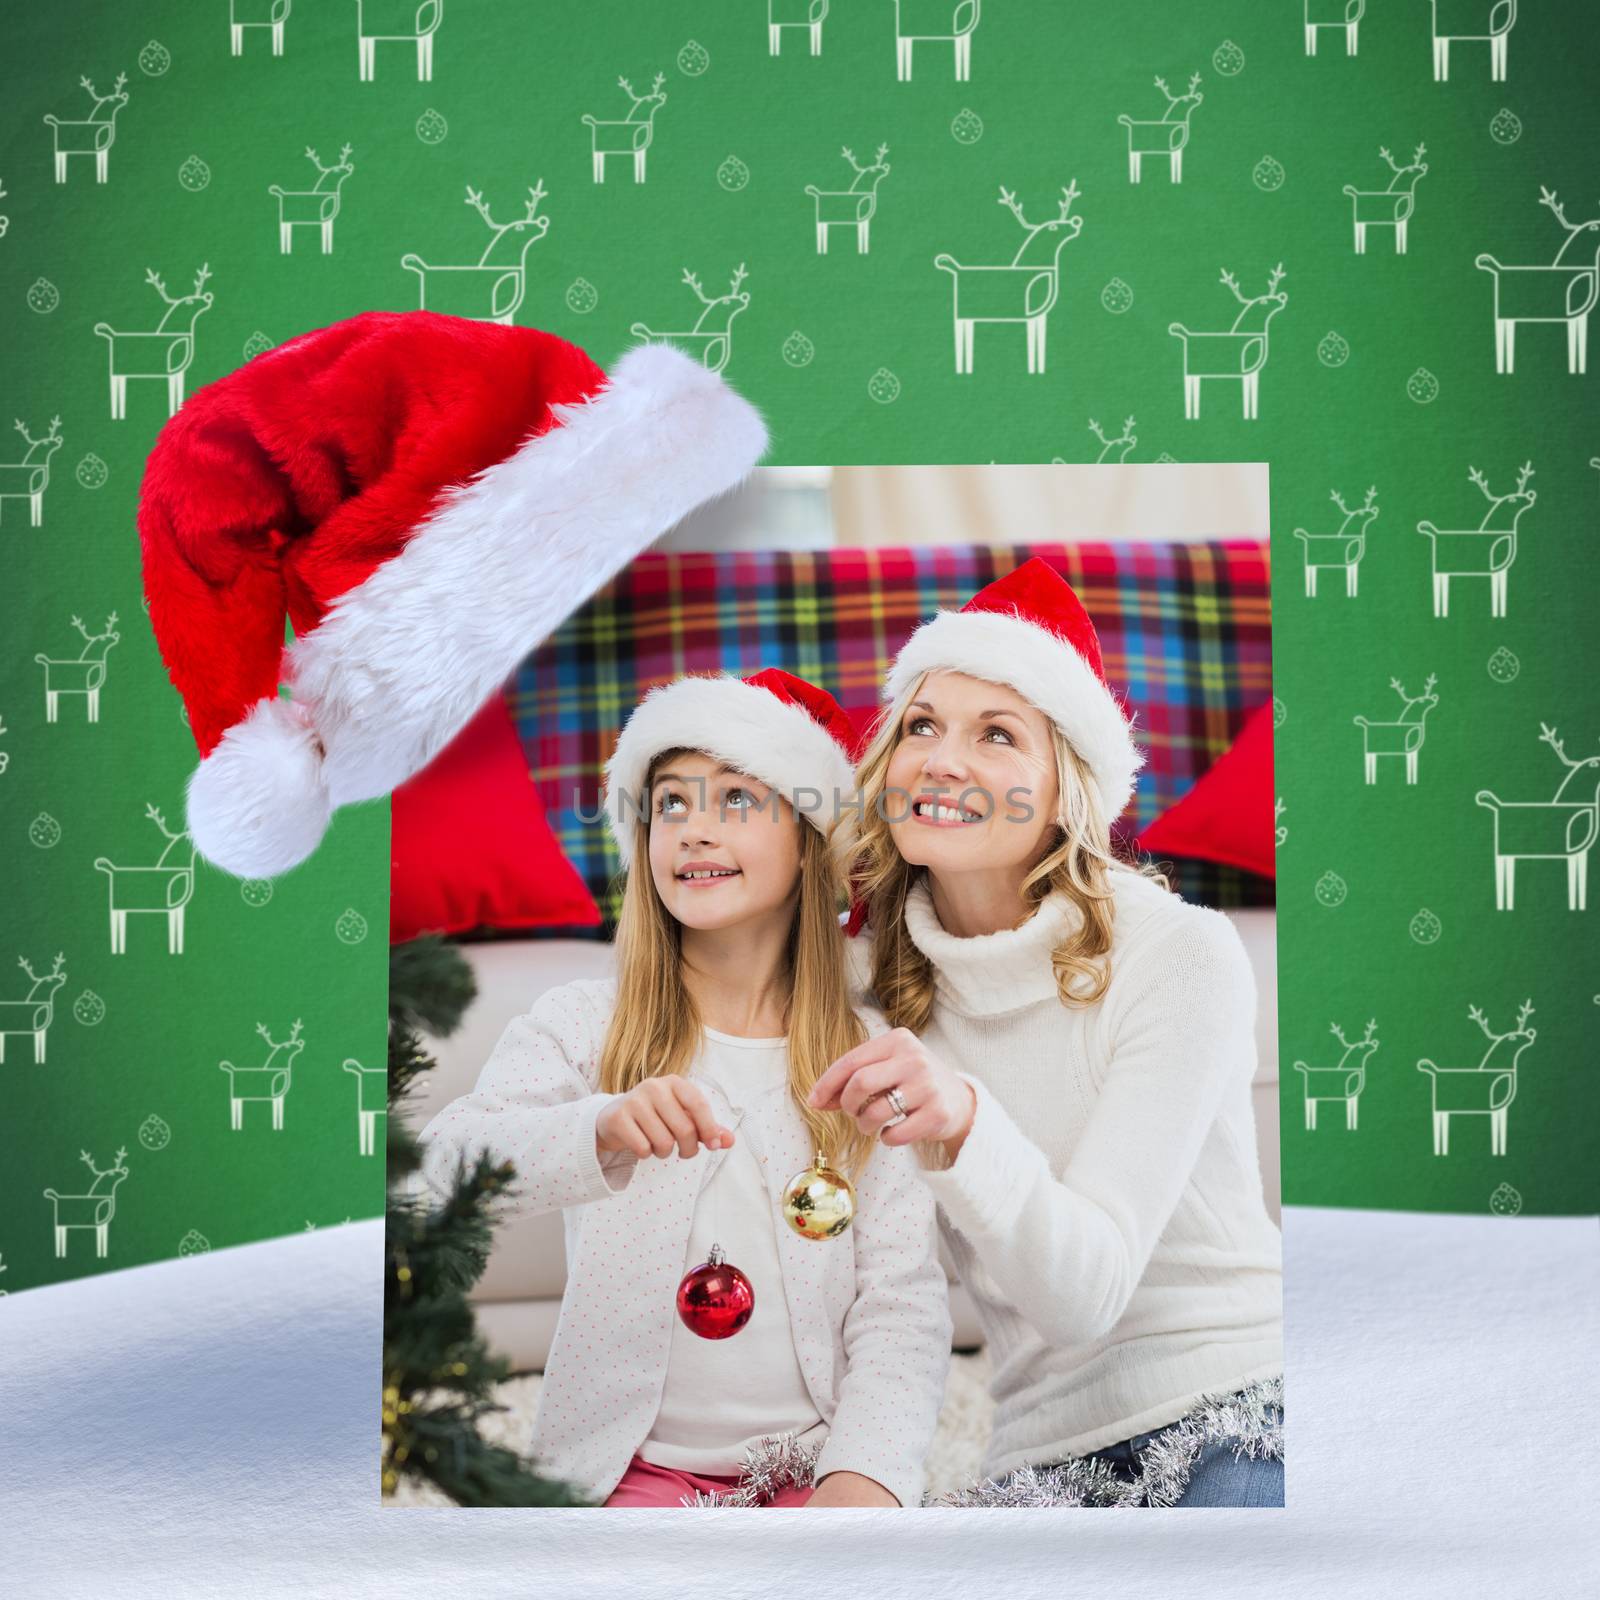 Festive mother and daughter decorating christmas tree against green reindeer pattern